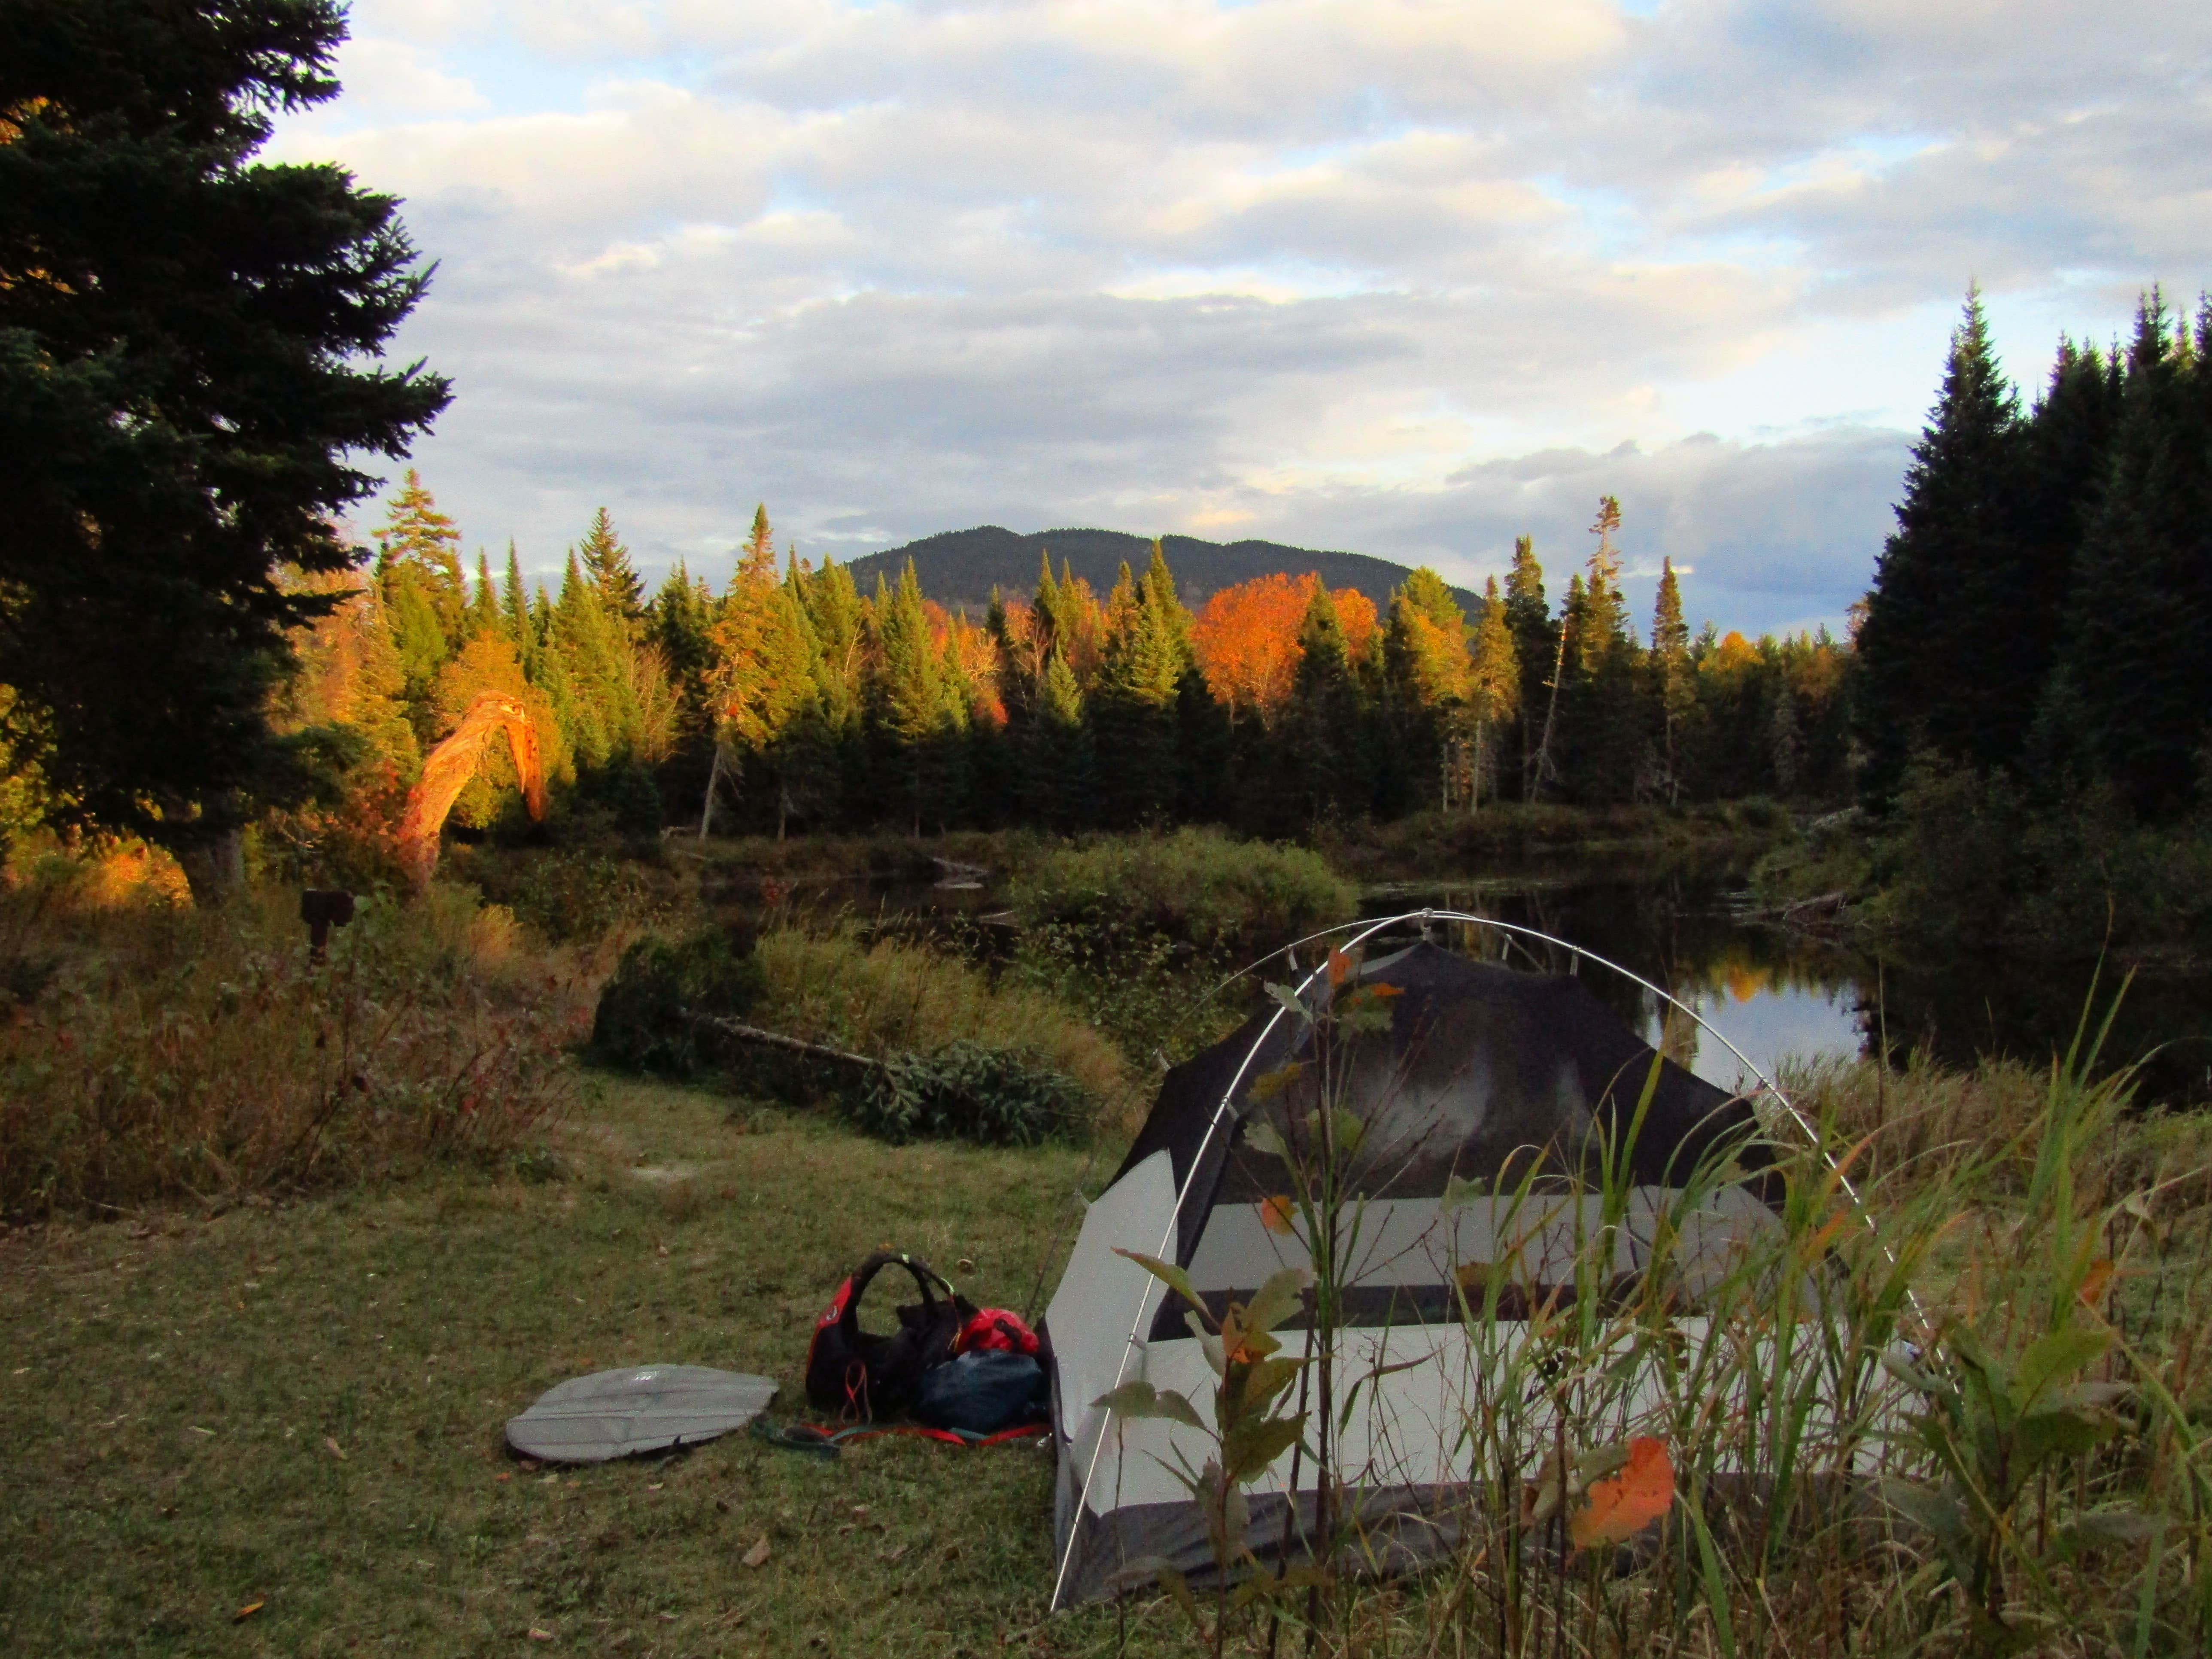 Camper submitted image from Attean Falls - 4